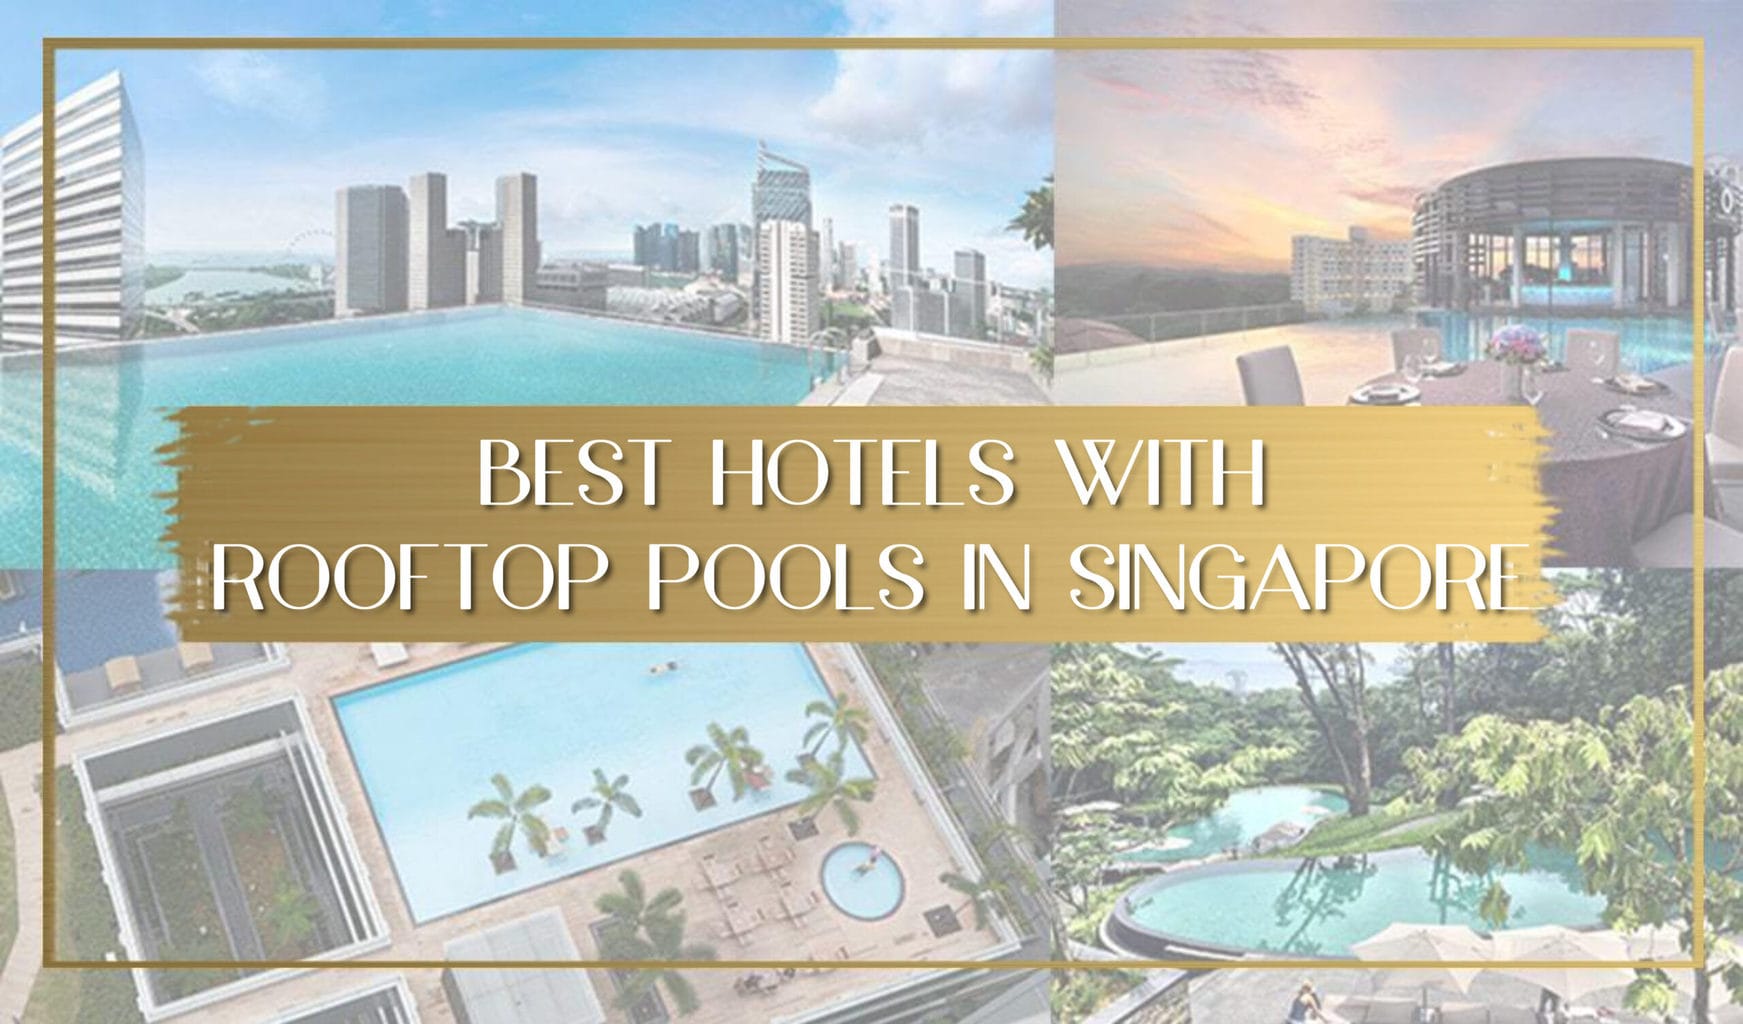 Best hotels with rooftop pools in Singapore main